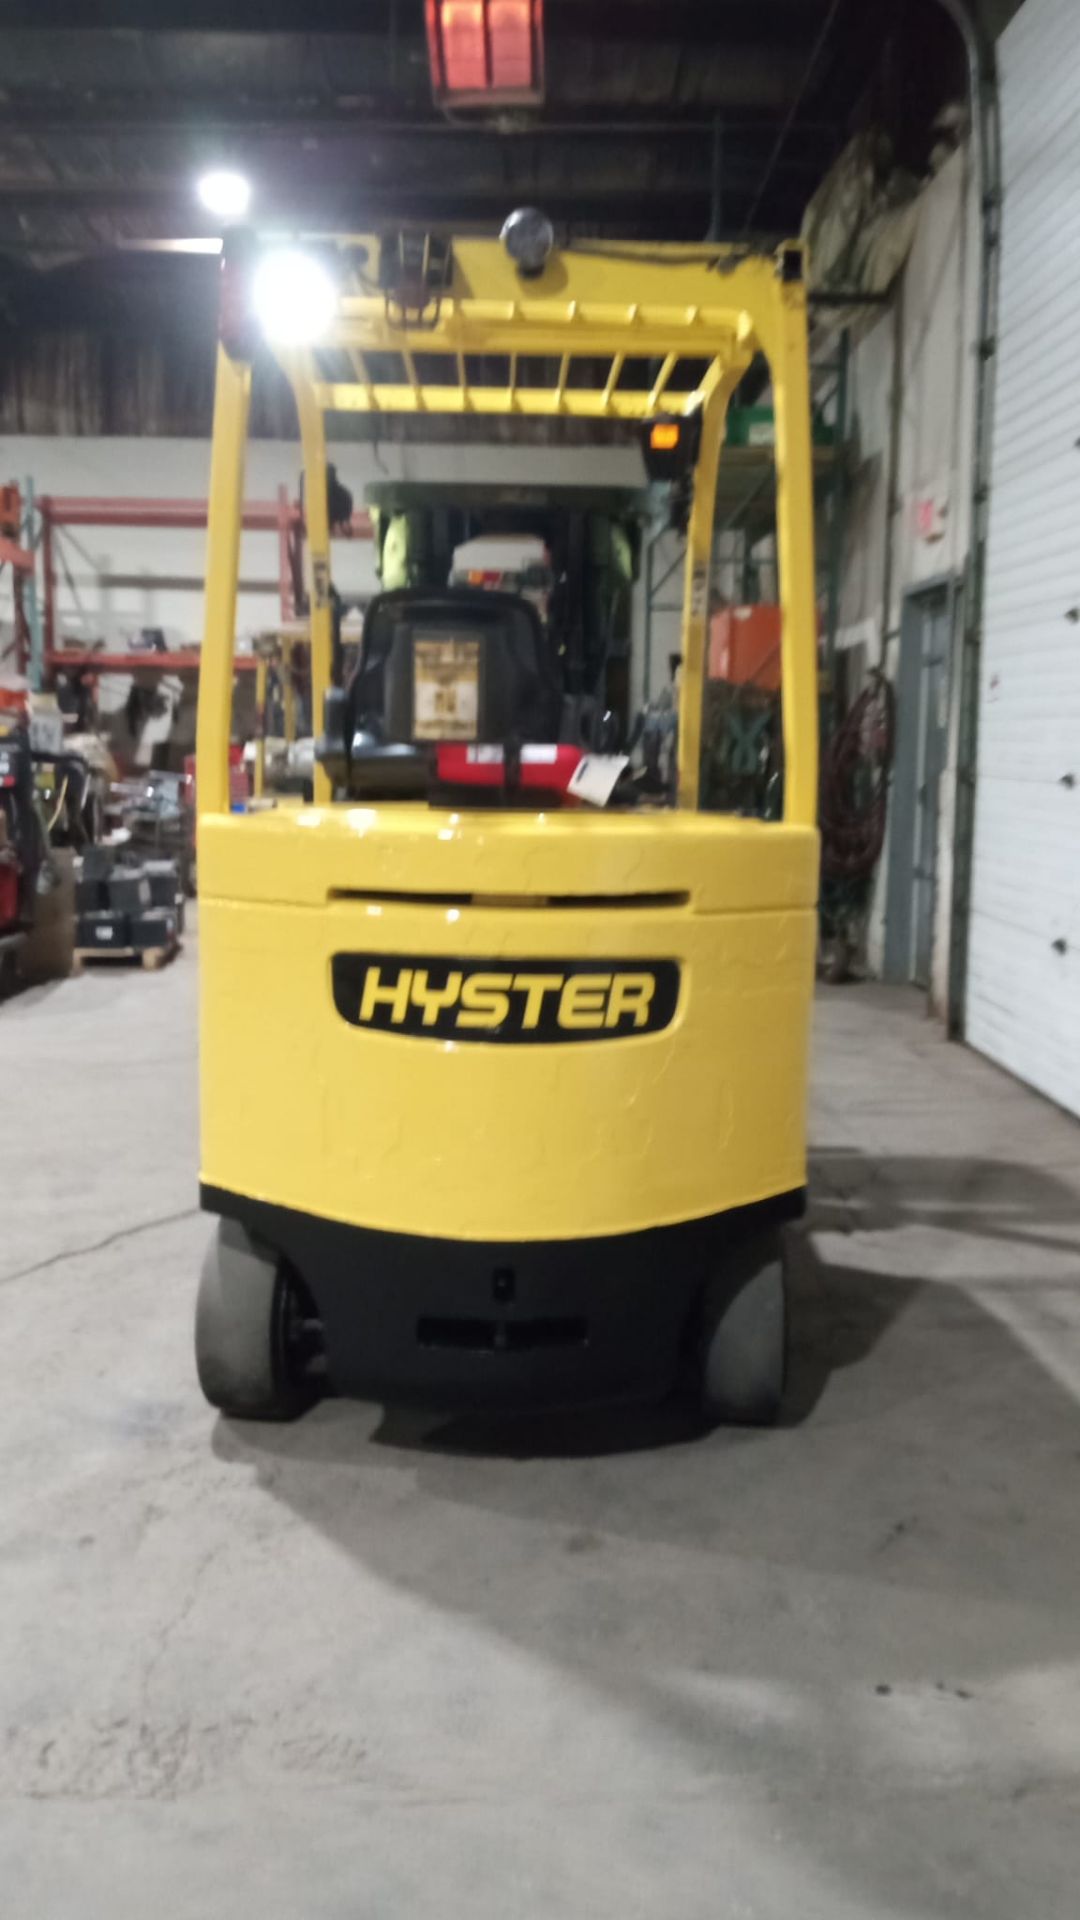 2016 Hyster 8,000lbs Capacity Electric Forklift 48V with sideshift  & 3 STAGE MAST with 60" Forks - Image 4 of 5